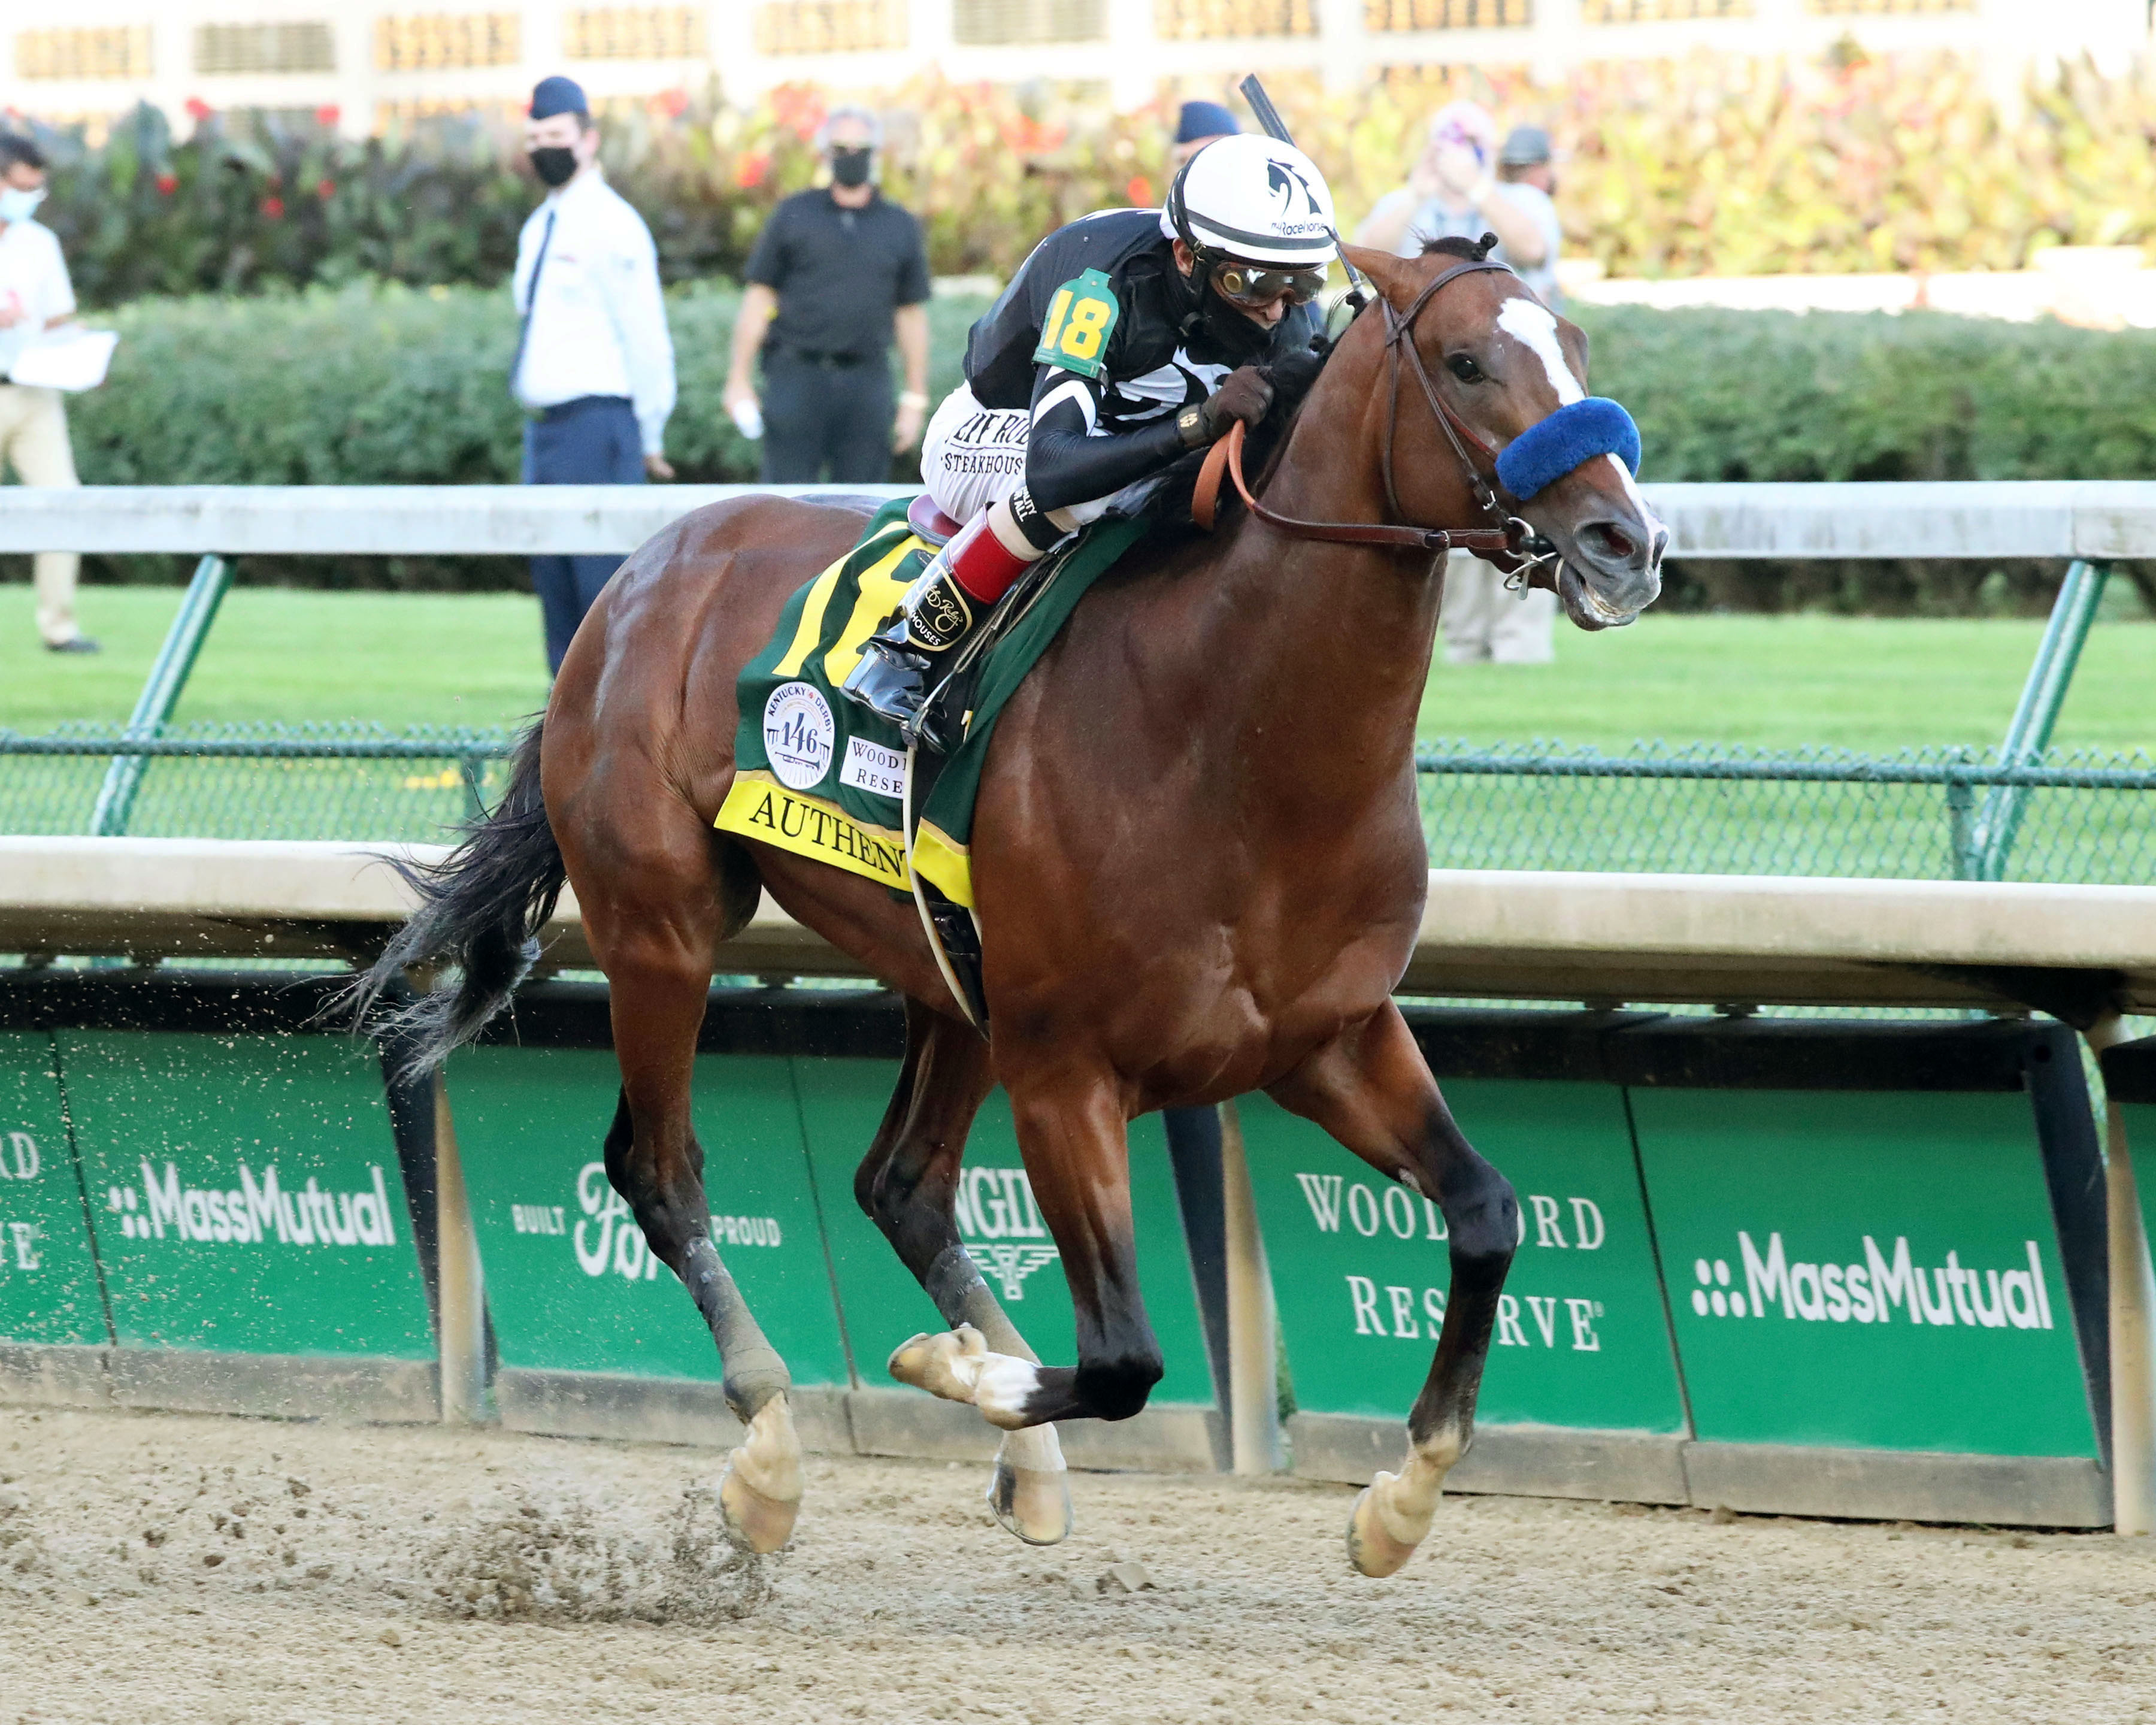 Authentic Wins Kentucky Derby 146 The Crunch Zone